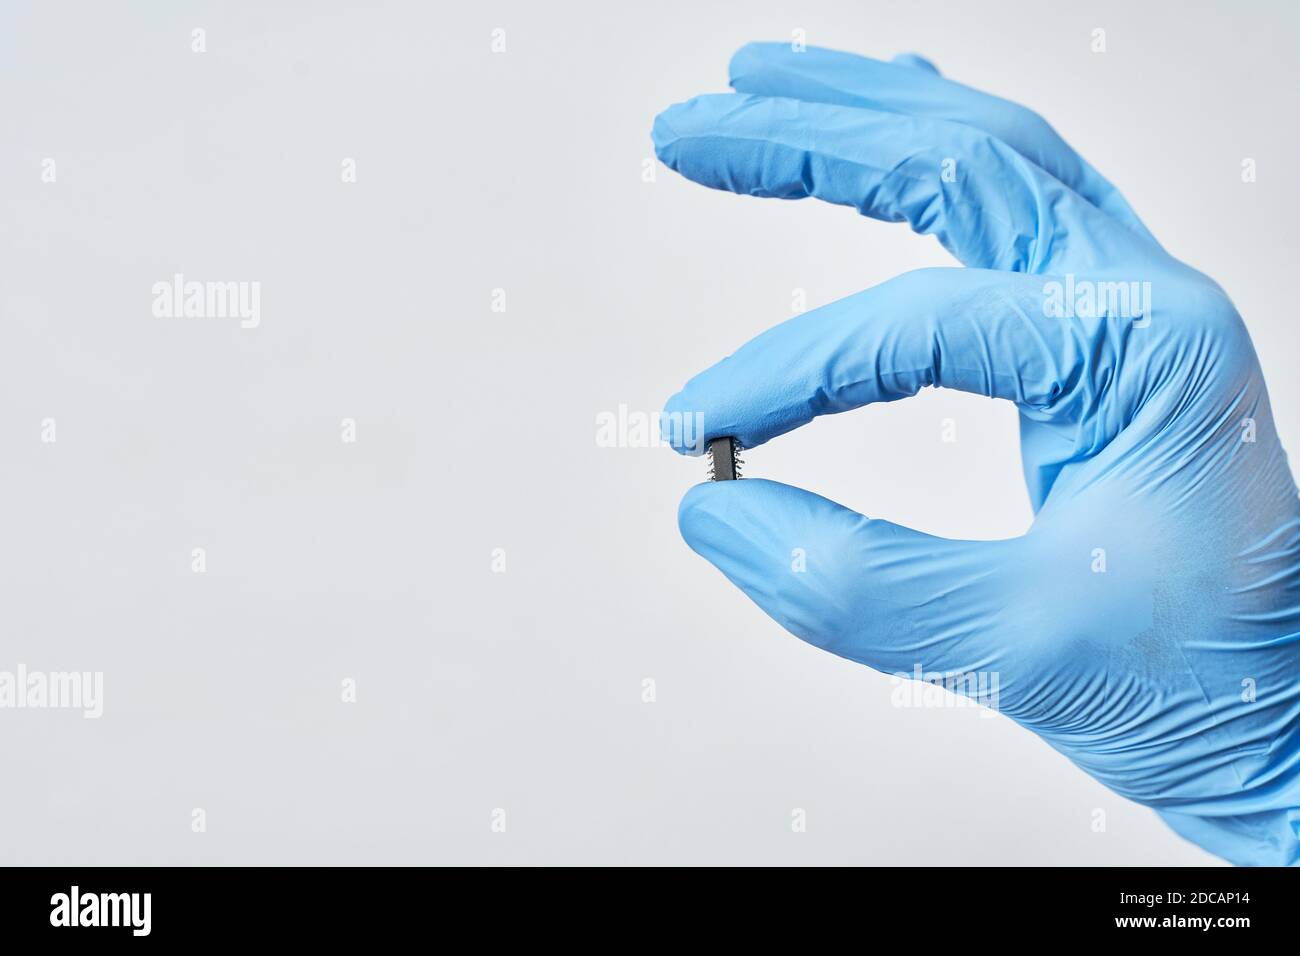 Embedding the chip under human skin, microcontroller implanting NFC technology. Stock Photo